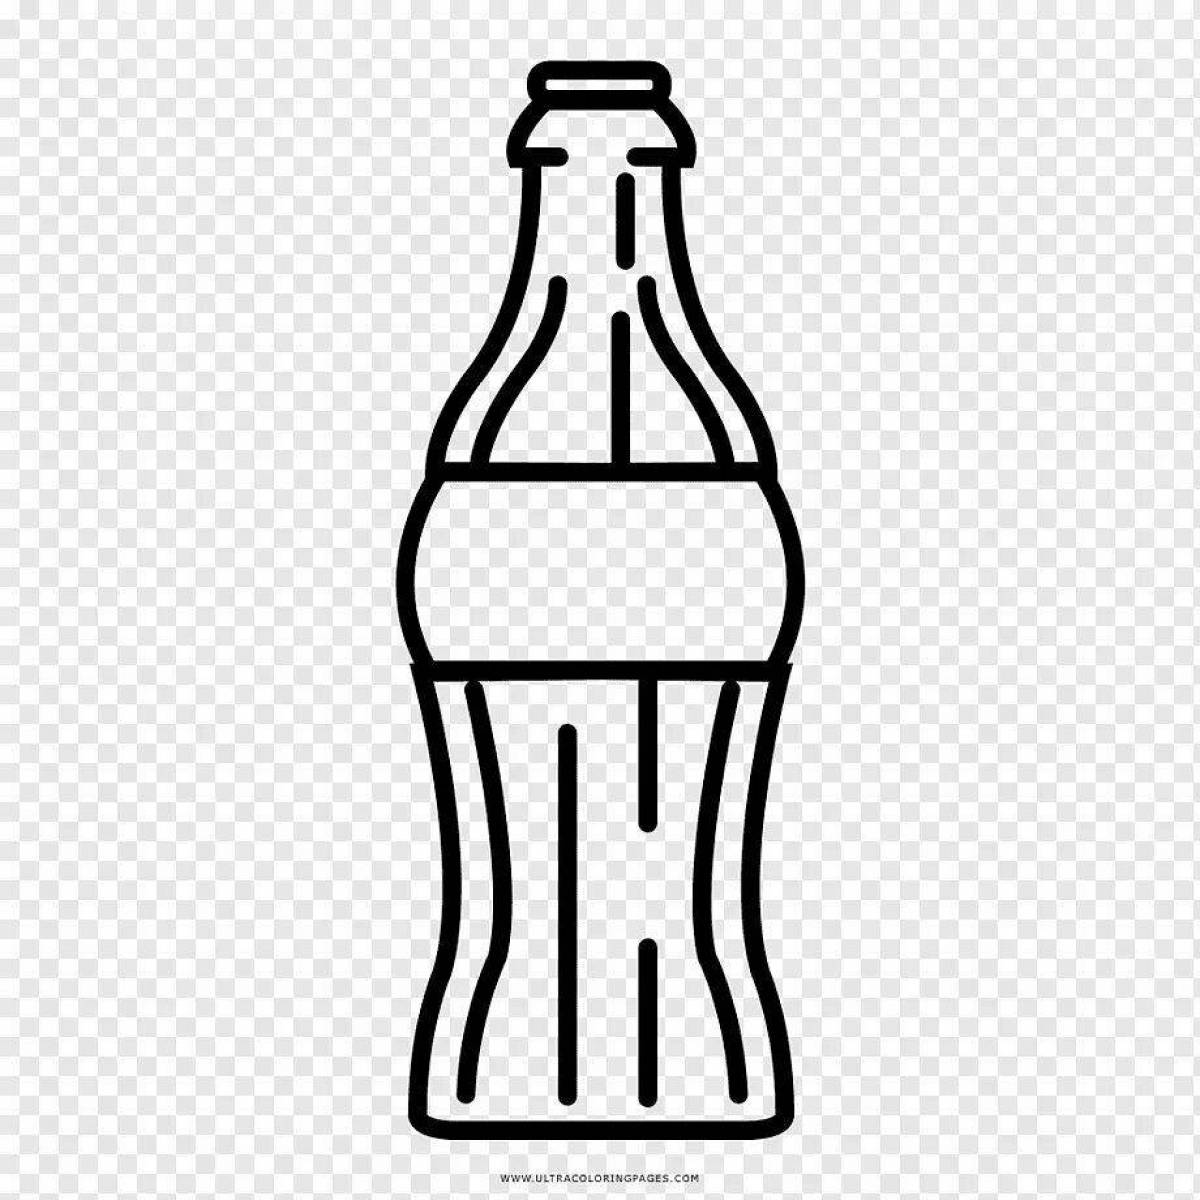 Exquisite bottle coloring page